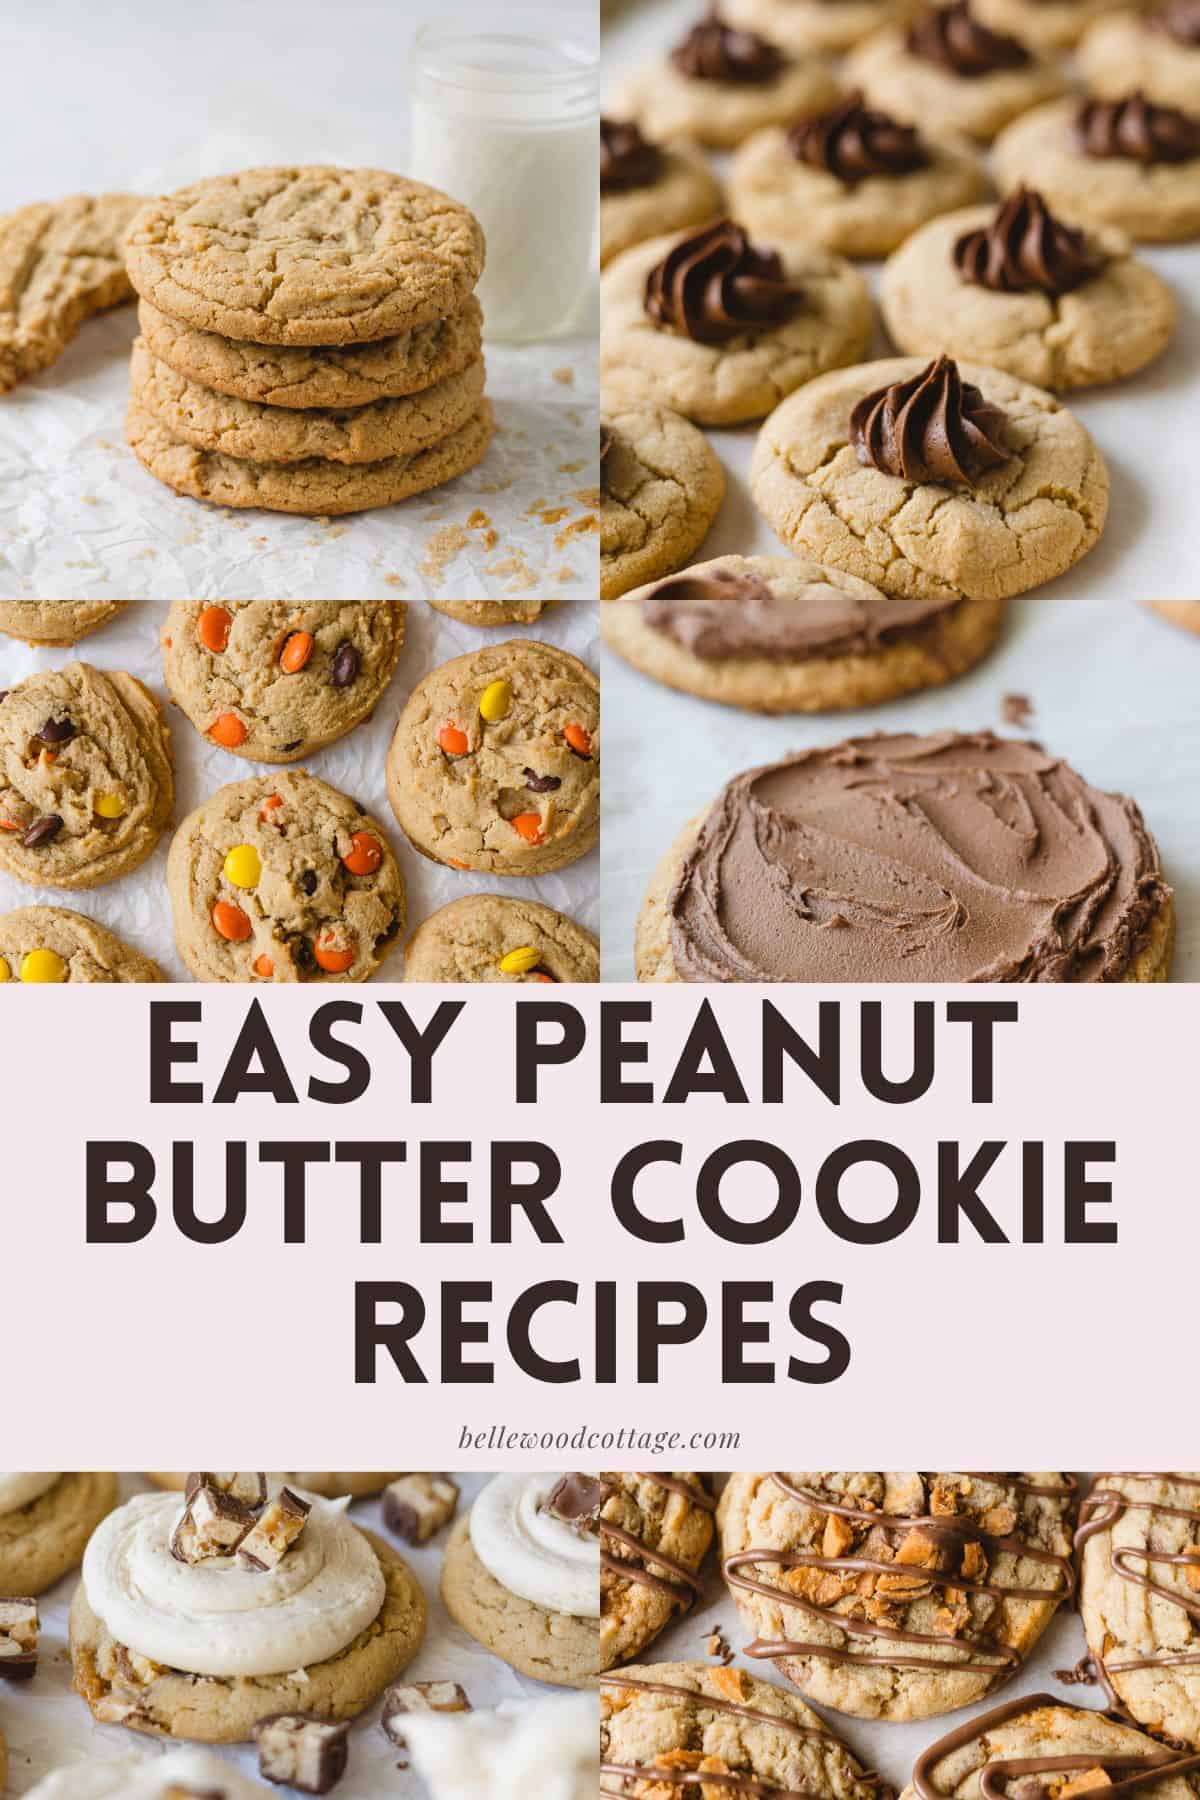 A collage of peanut butter cookies frosted and unfrosted with the words, "Easy Peanut Butter Cookies".